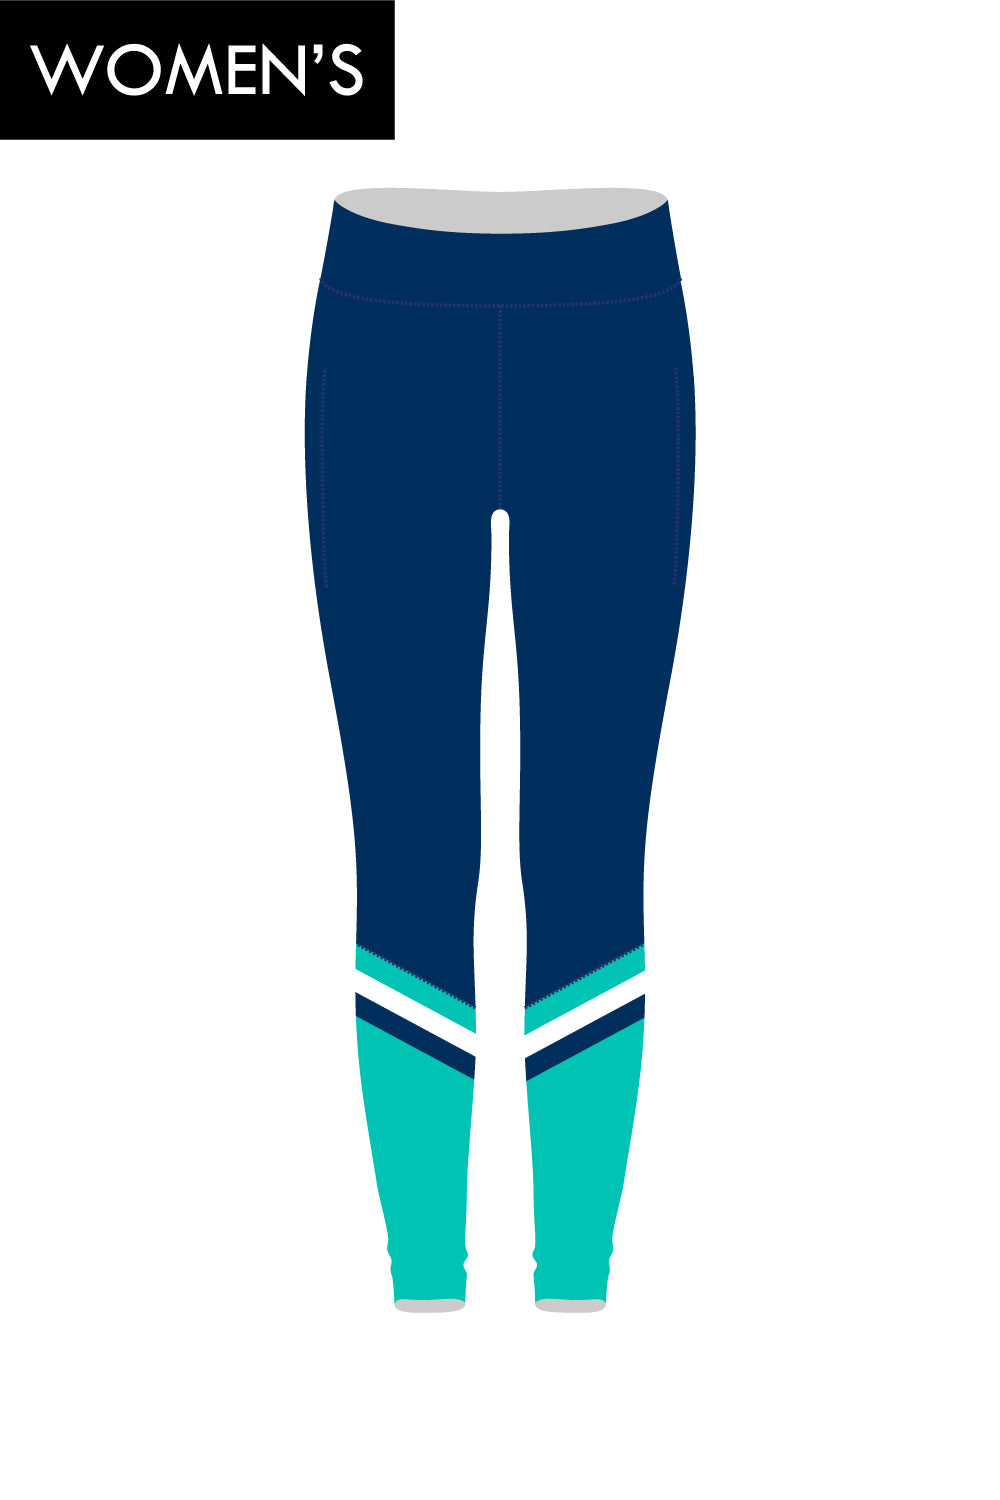 Narrabeen Swimming Team Tights